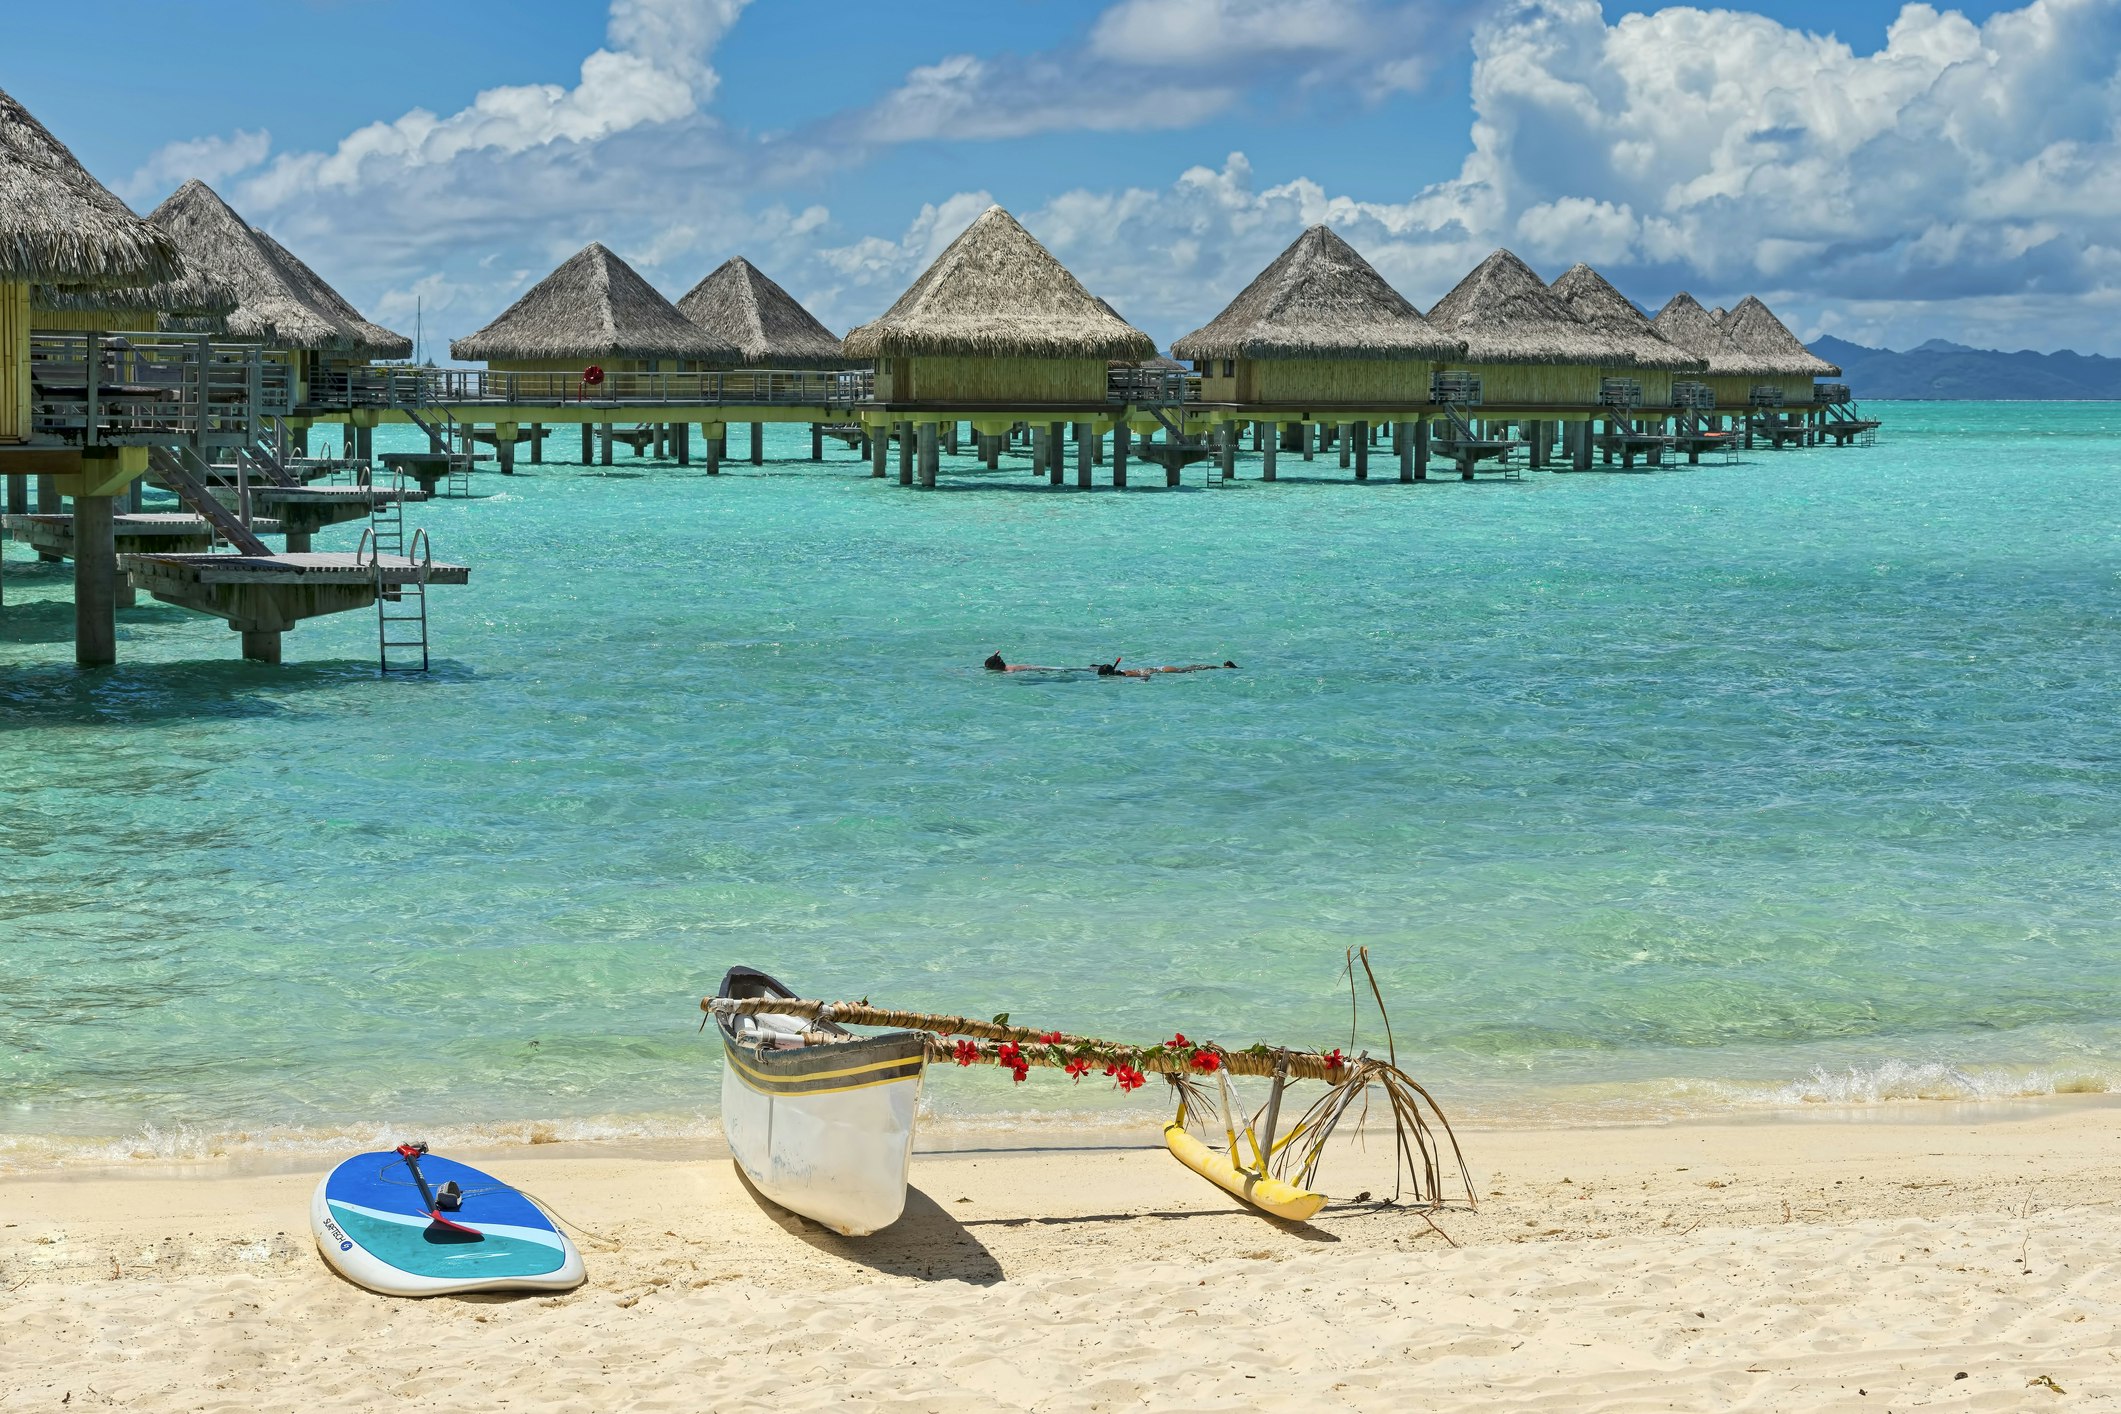 A decorated outrigger boat rests on the beach in front of overwater bungalows in Bora Bora